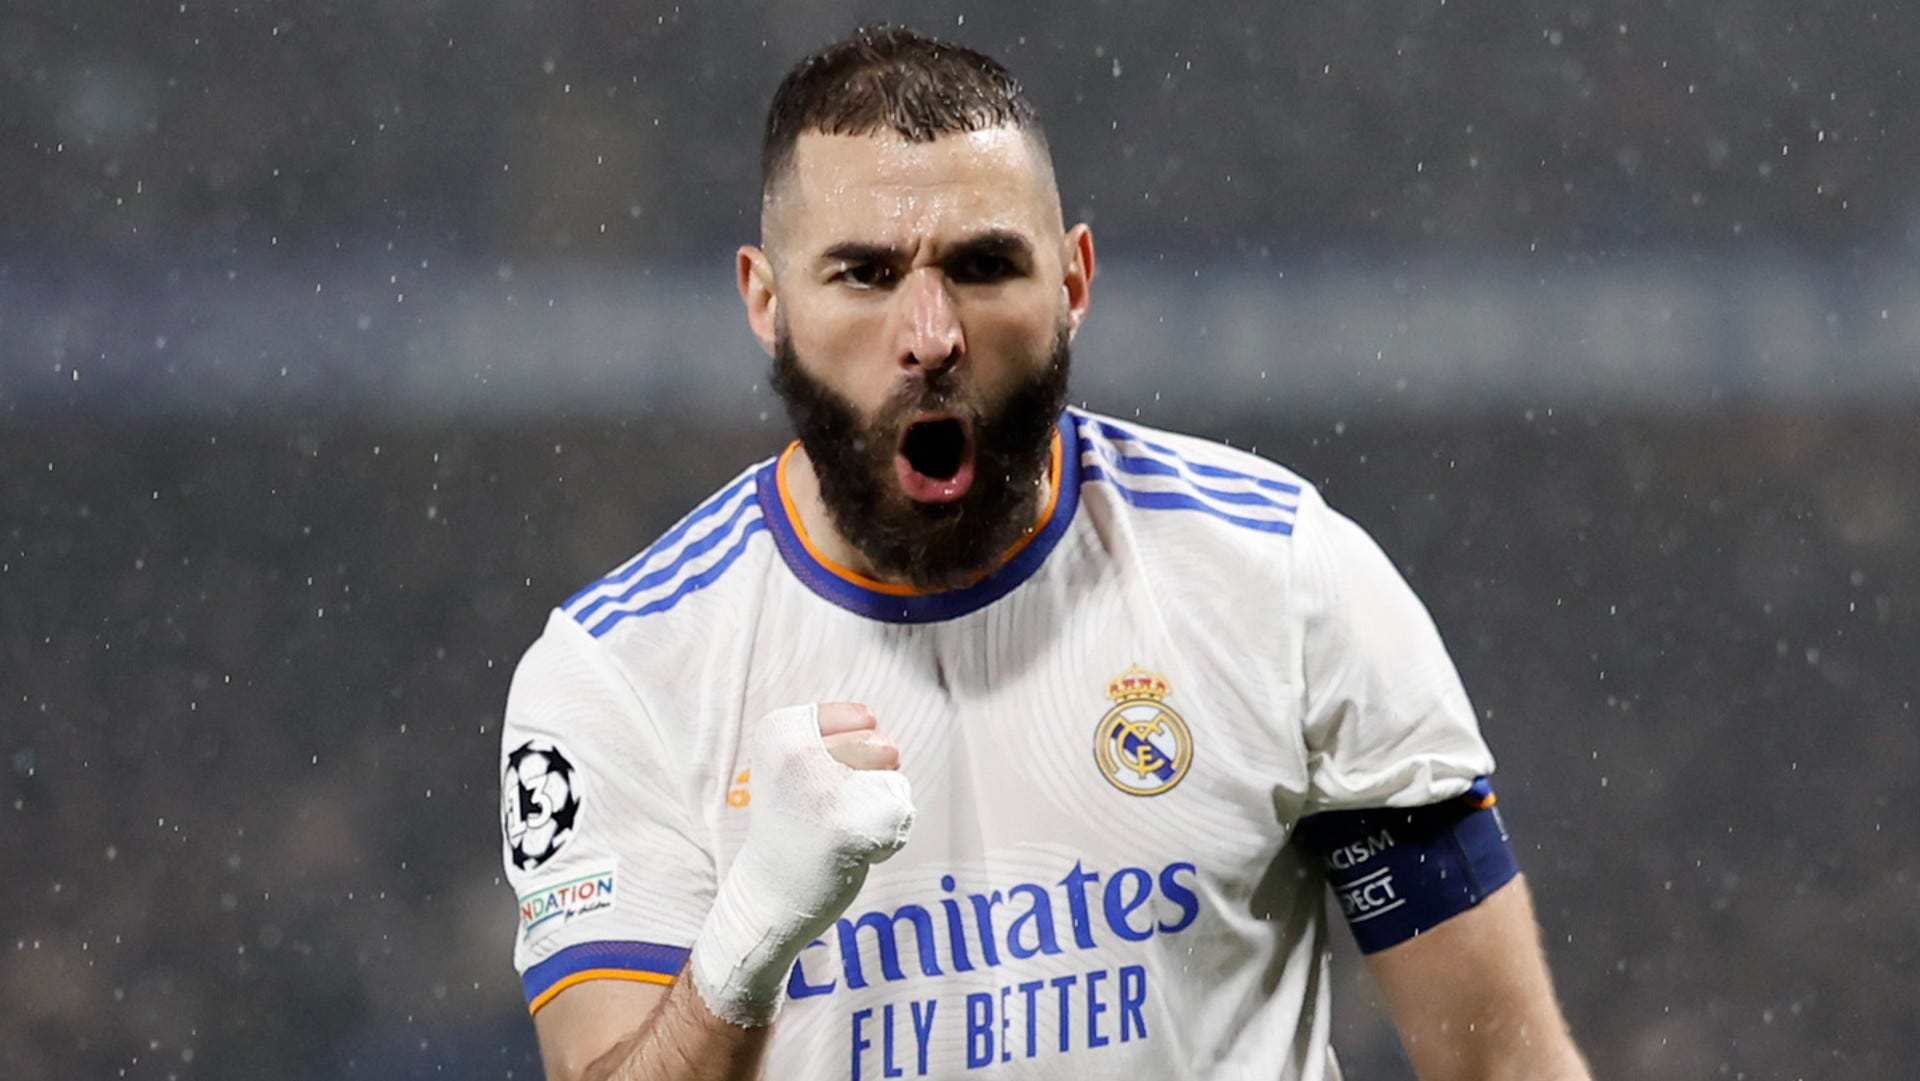 Ronaldo-like Benzema blows Chelsea away with second consecutive Champions League hat-trick for Madrid | Goal.com Singapore